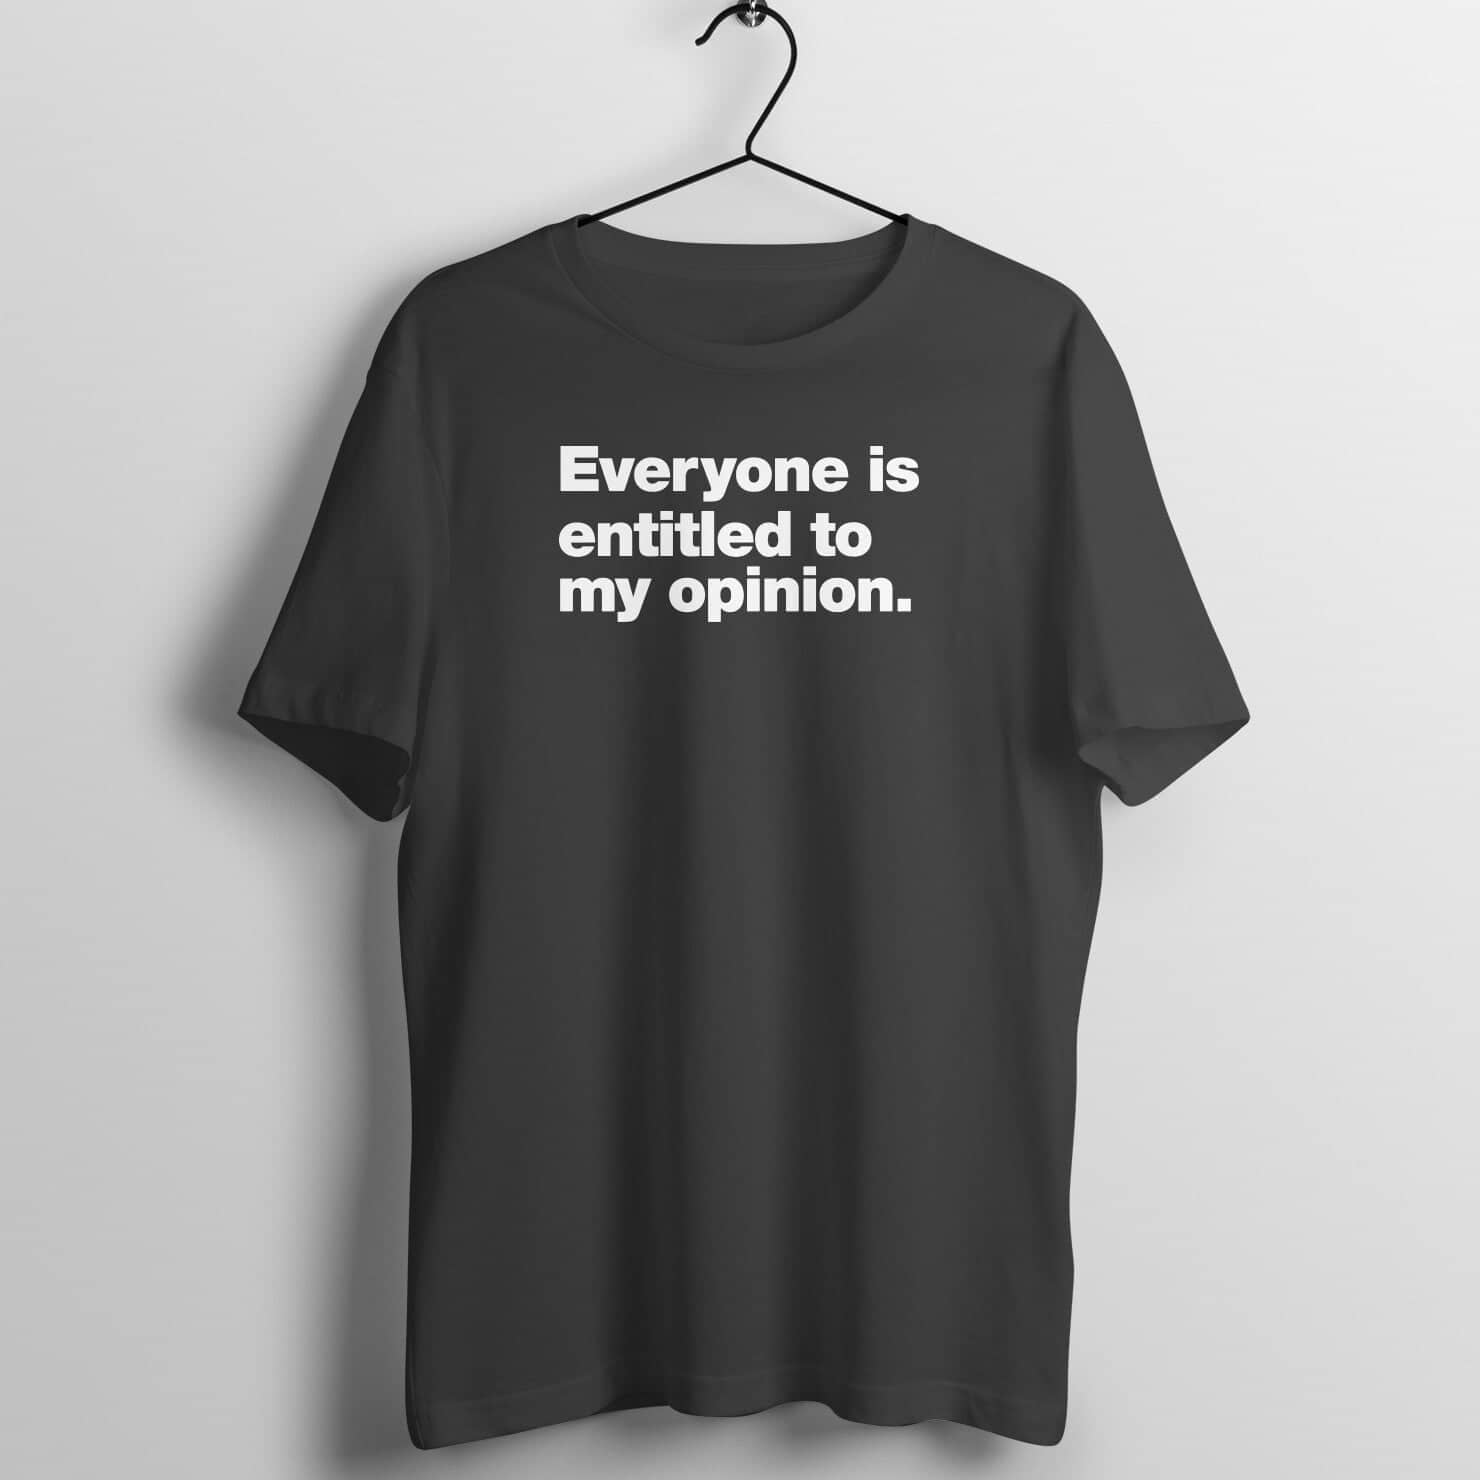 Everyone is Entitled to My Opinion Funny Black T Shirt for Men and Women Printrove Black S 